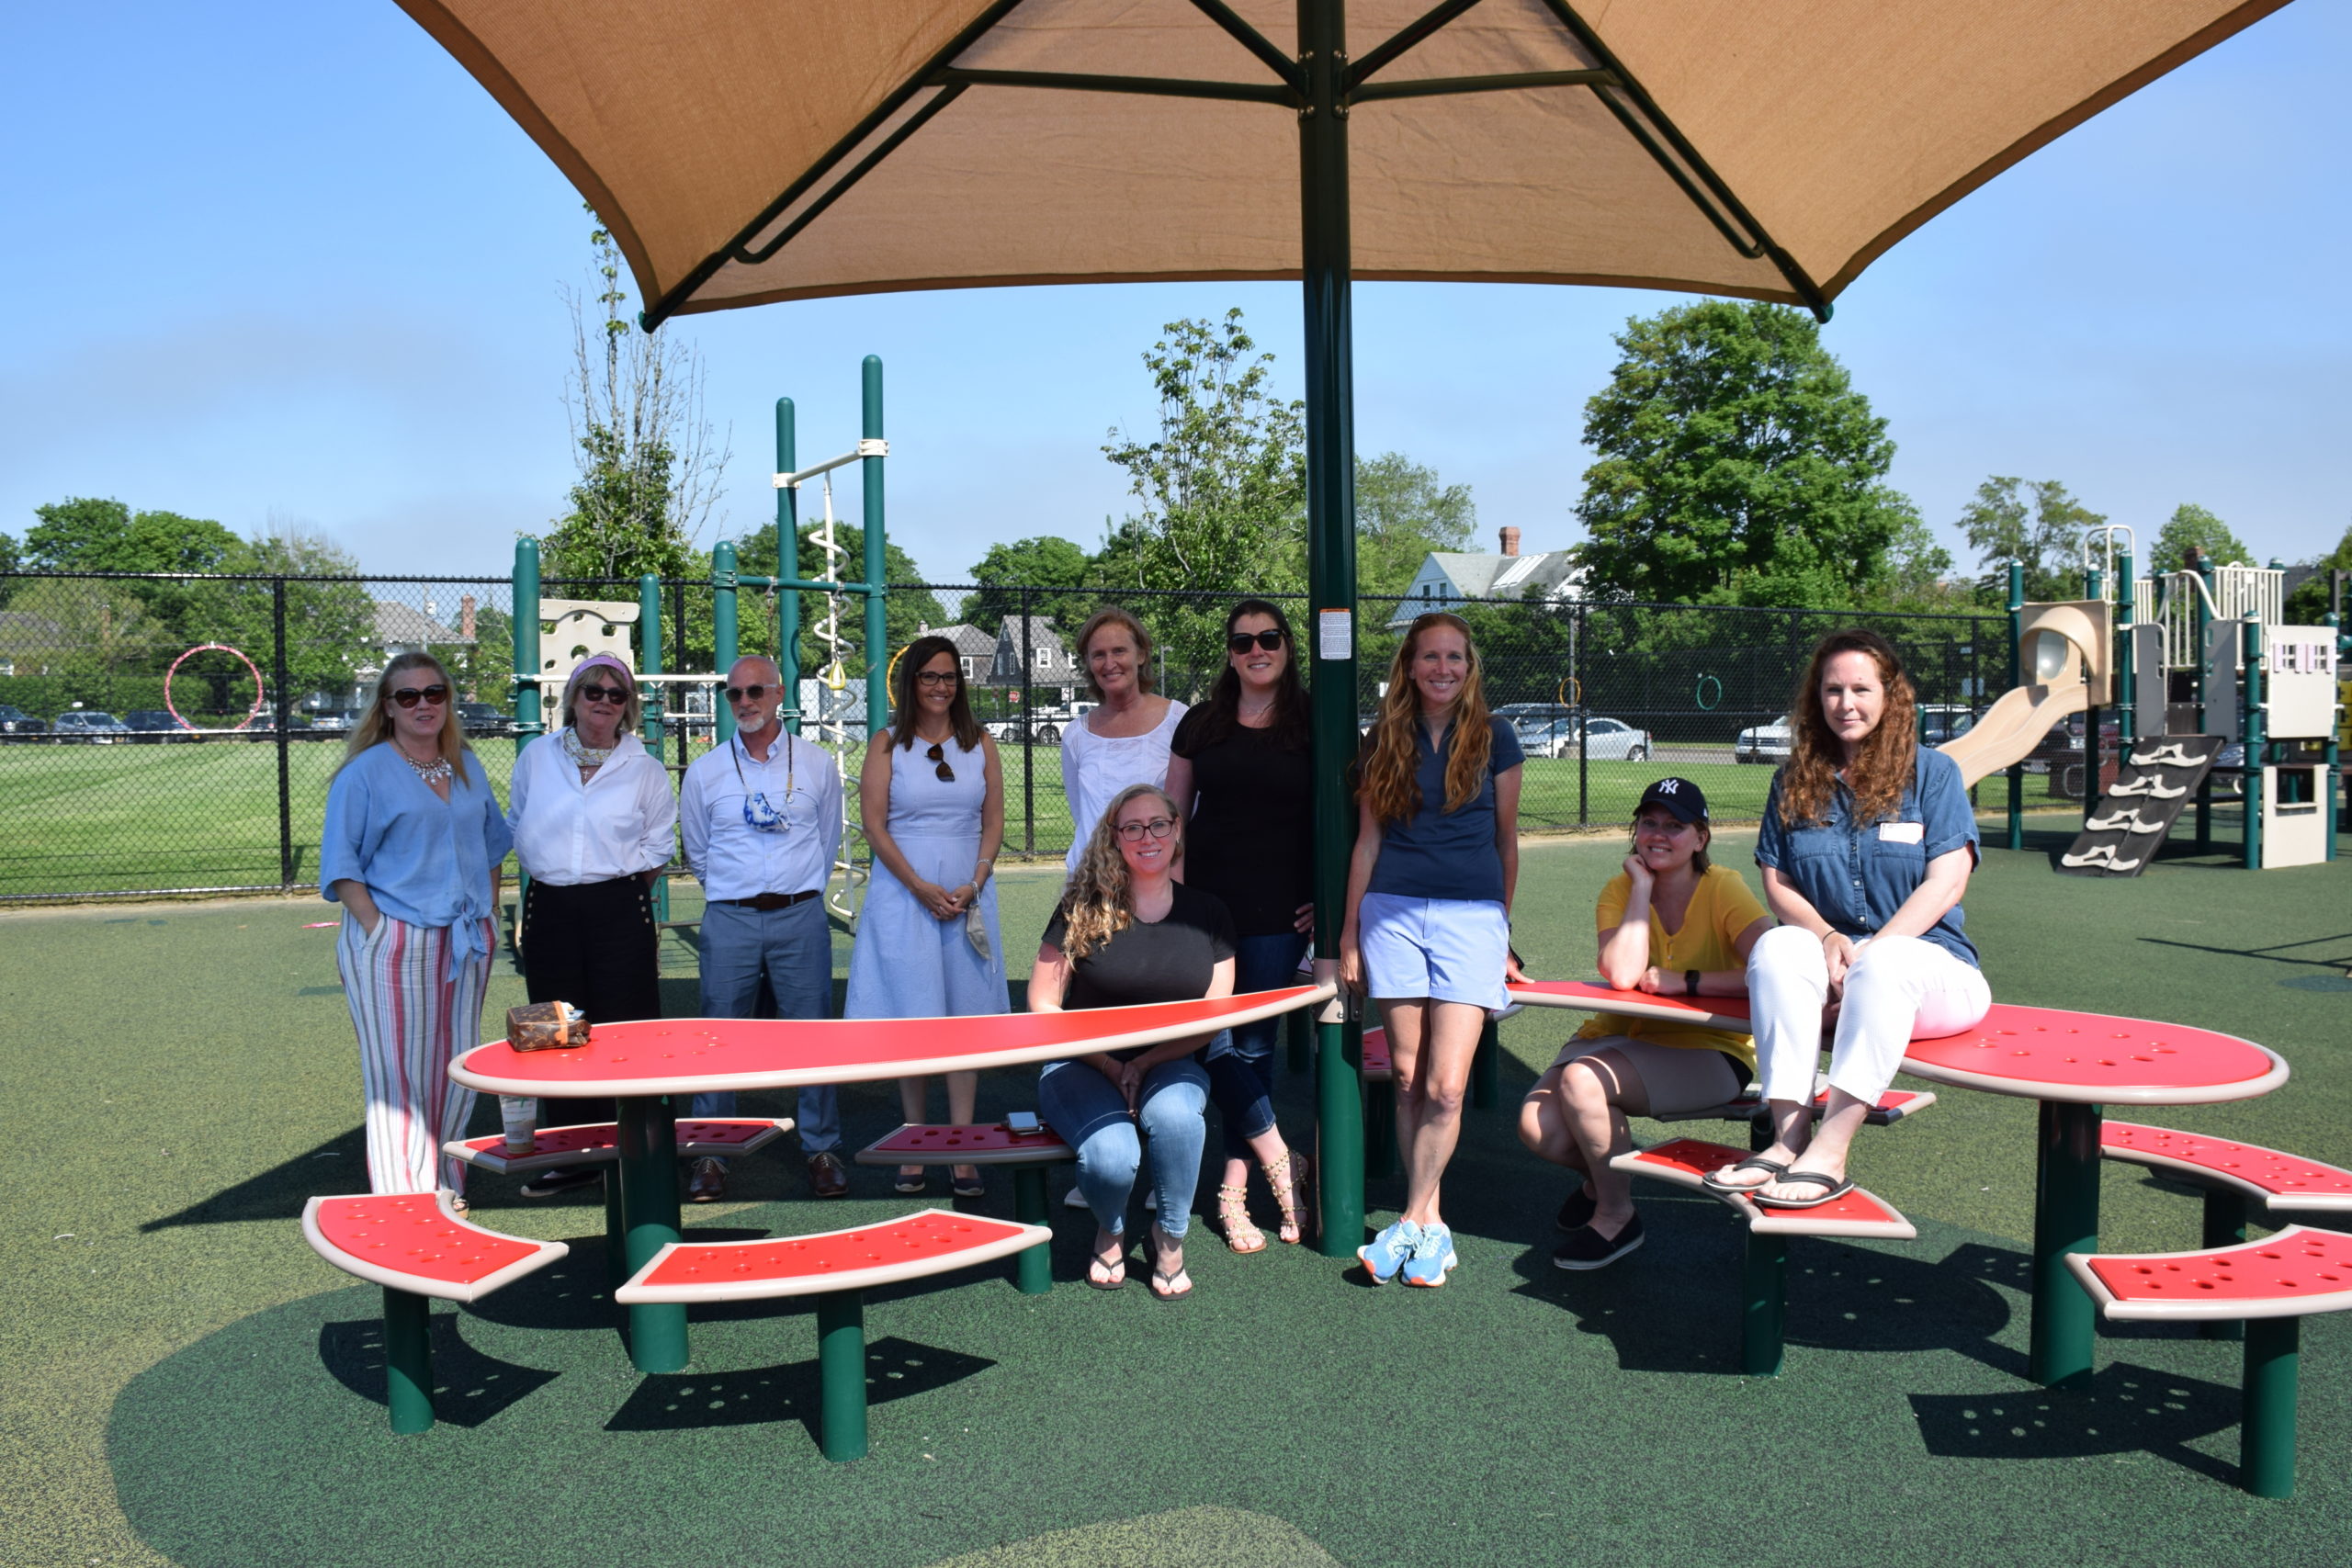 Southampton Elementary School unveiled a new piece of playground equipment dedicated to longtime teacher Liz Hague during a ceremony on June 7.